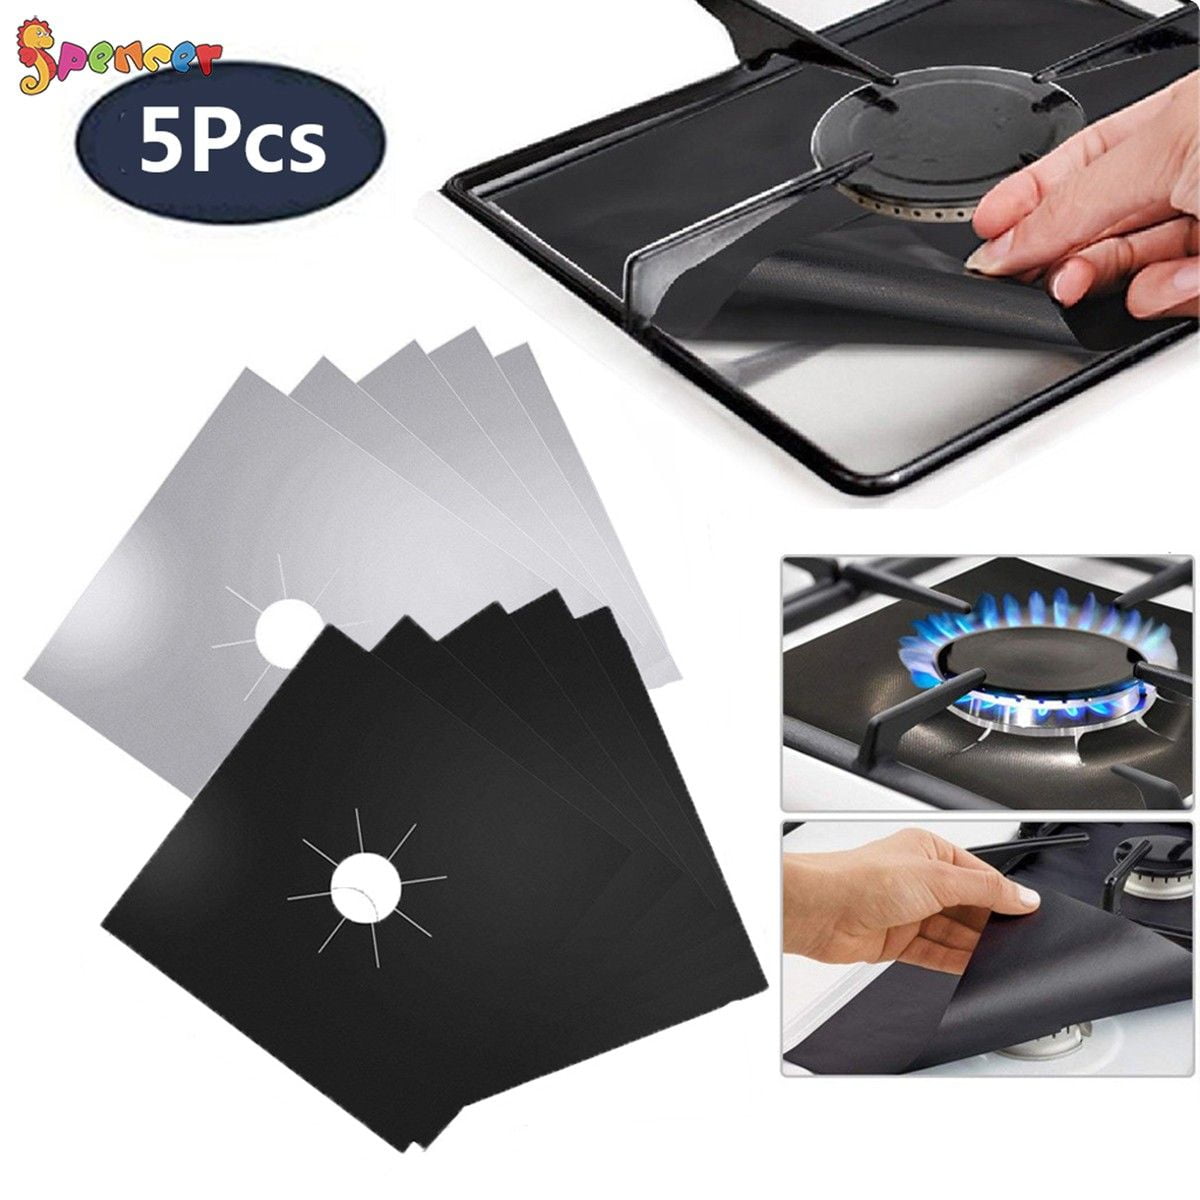 Stove Covers for Gas Stove Top 5 Burner, High Temperature And Oil Resistant  Stove Top Mats for 5 Burner Gas Stove Non-Stick Washable Keep Stove Clean  Protector Stove Top Covers (0.2mm): Home & Kitchen 